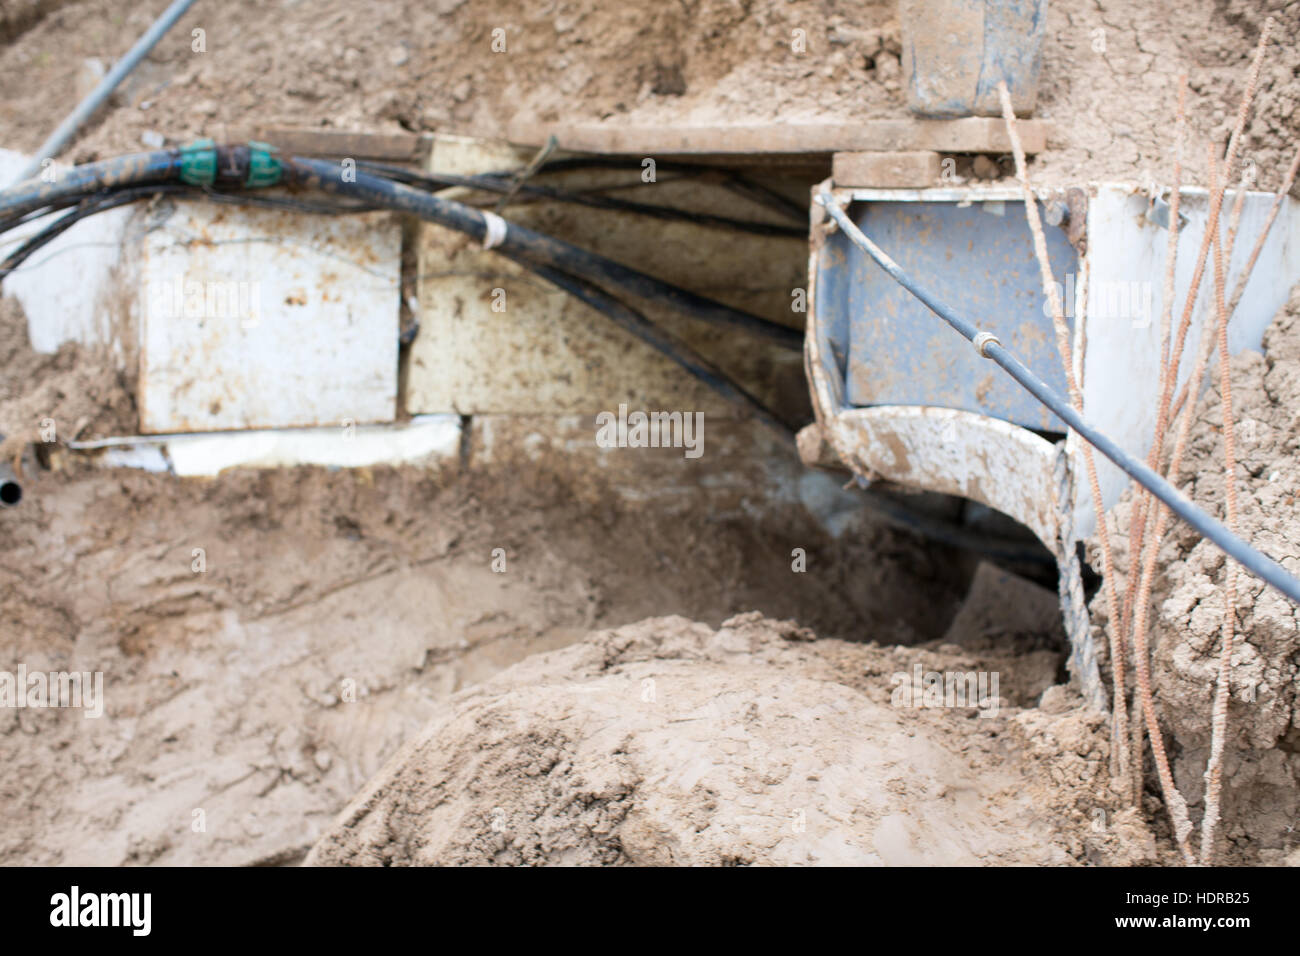 Inside a small tunnel in southern Gaza, used to smuggle men and goods in from Egypt. Stock Photo